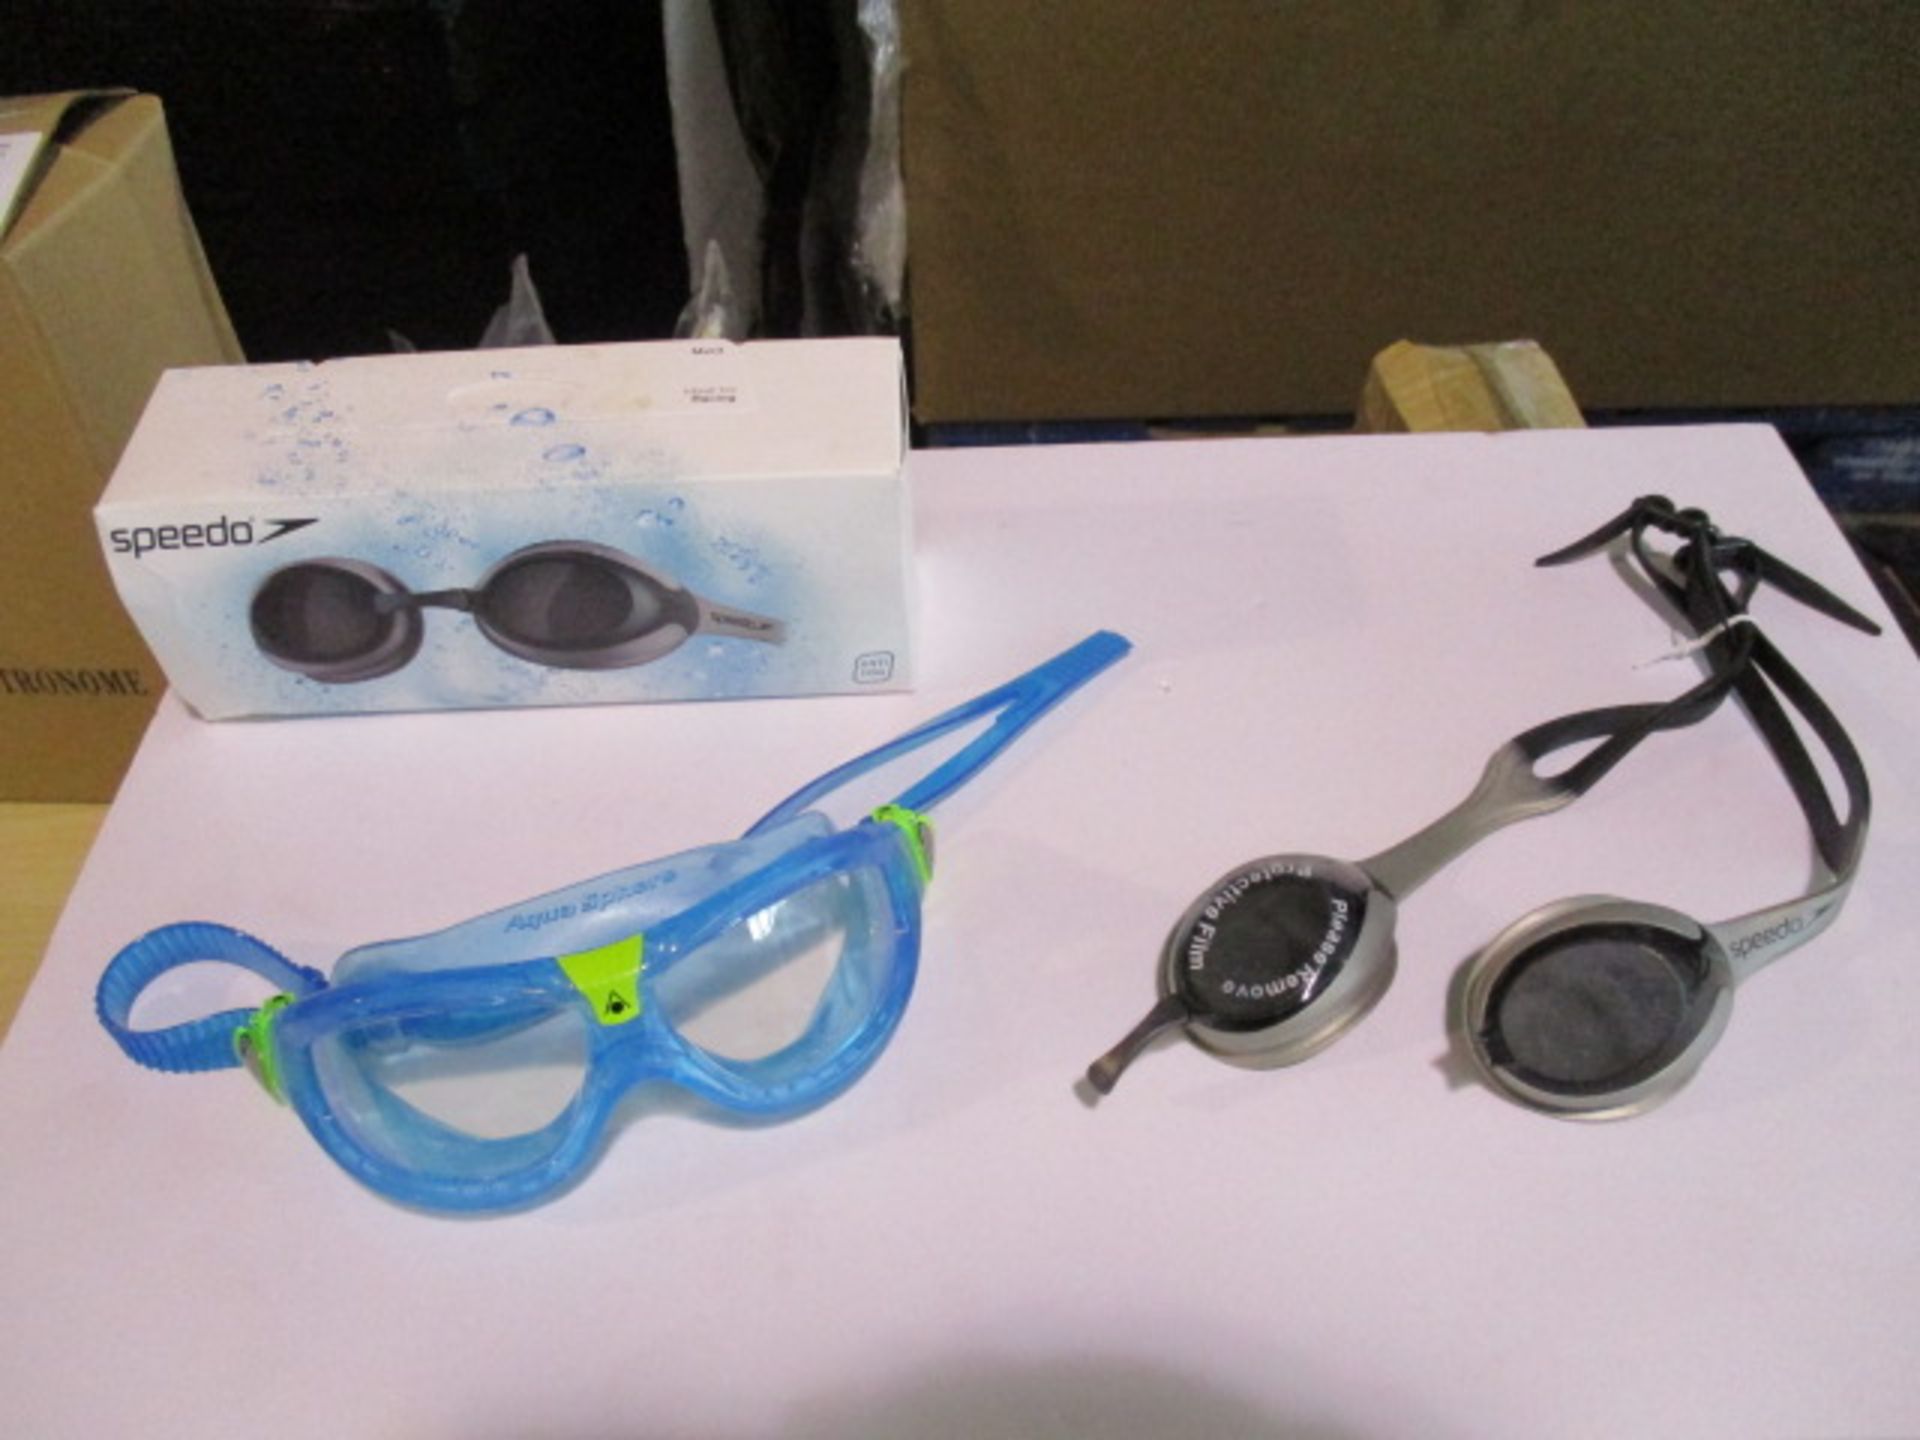 Aqua Sphere & Speedo - 2 pairs of faulty swimming goggles as pictured